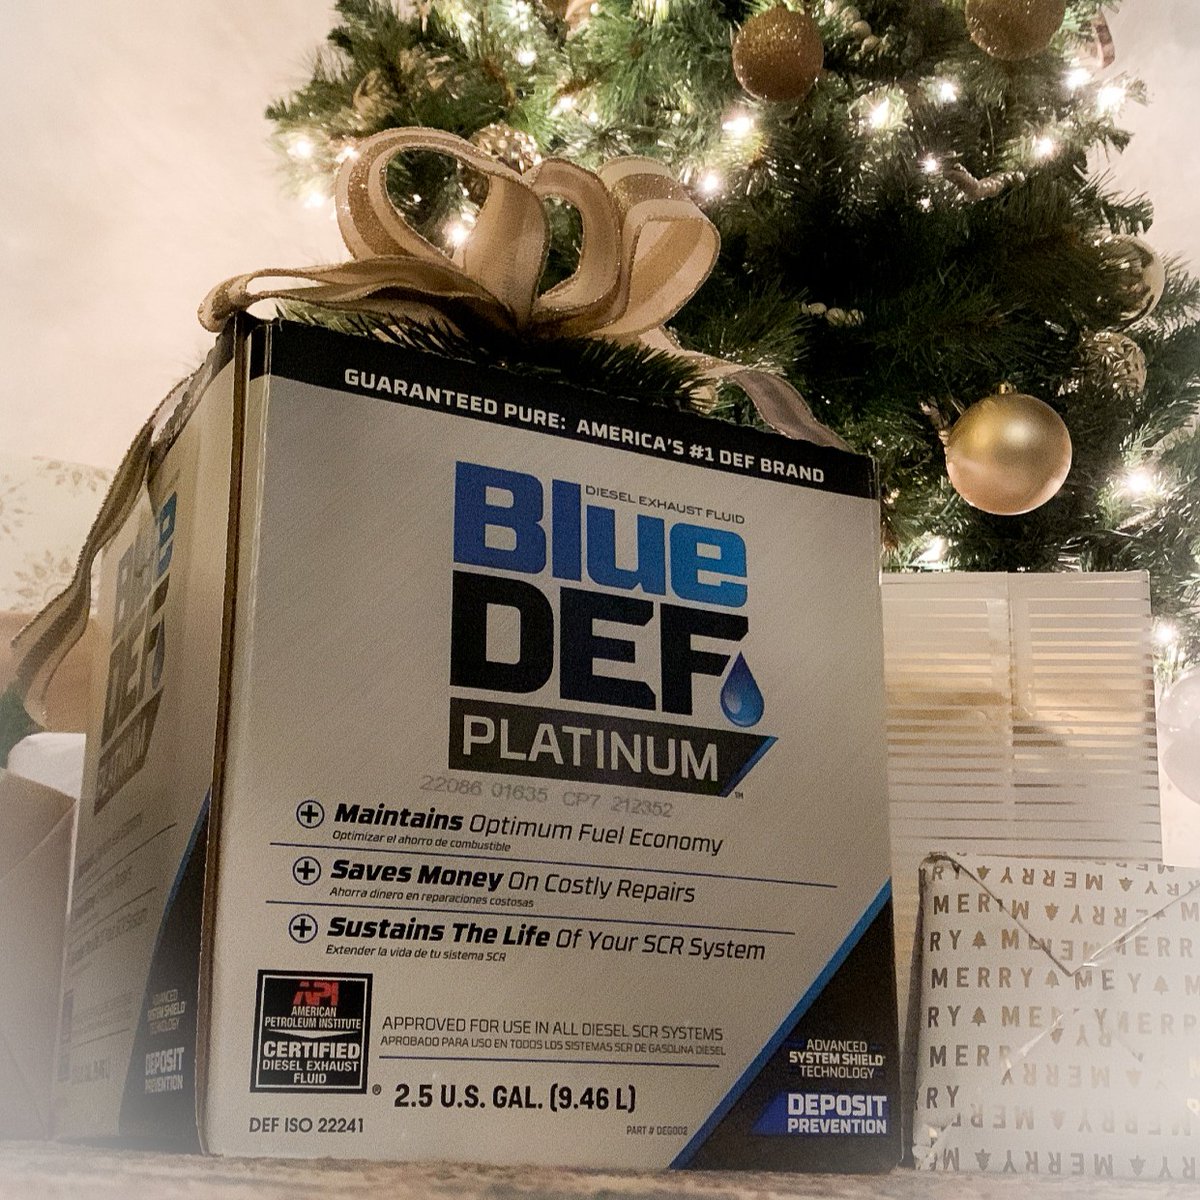 Did you get any #BlueDEF for Christmas this year?